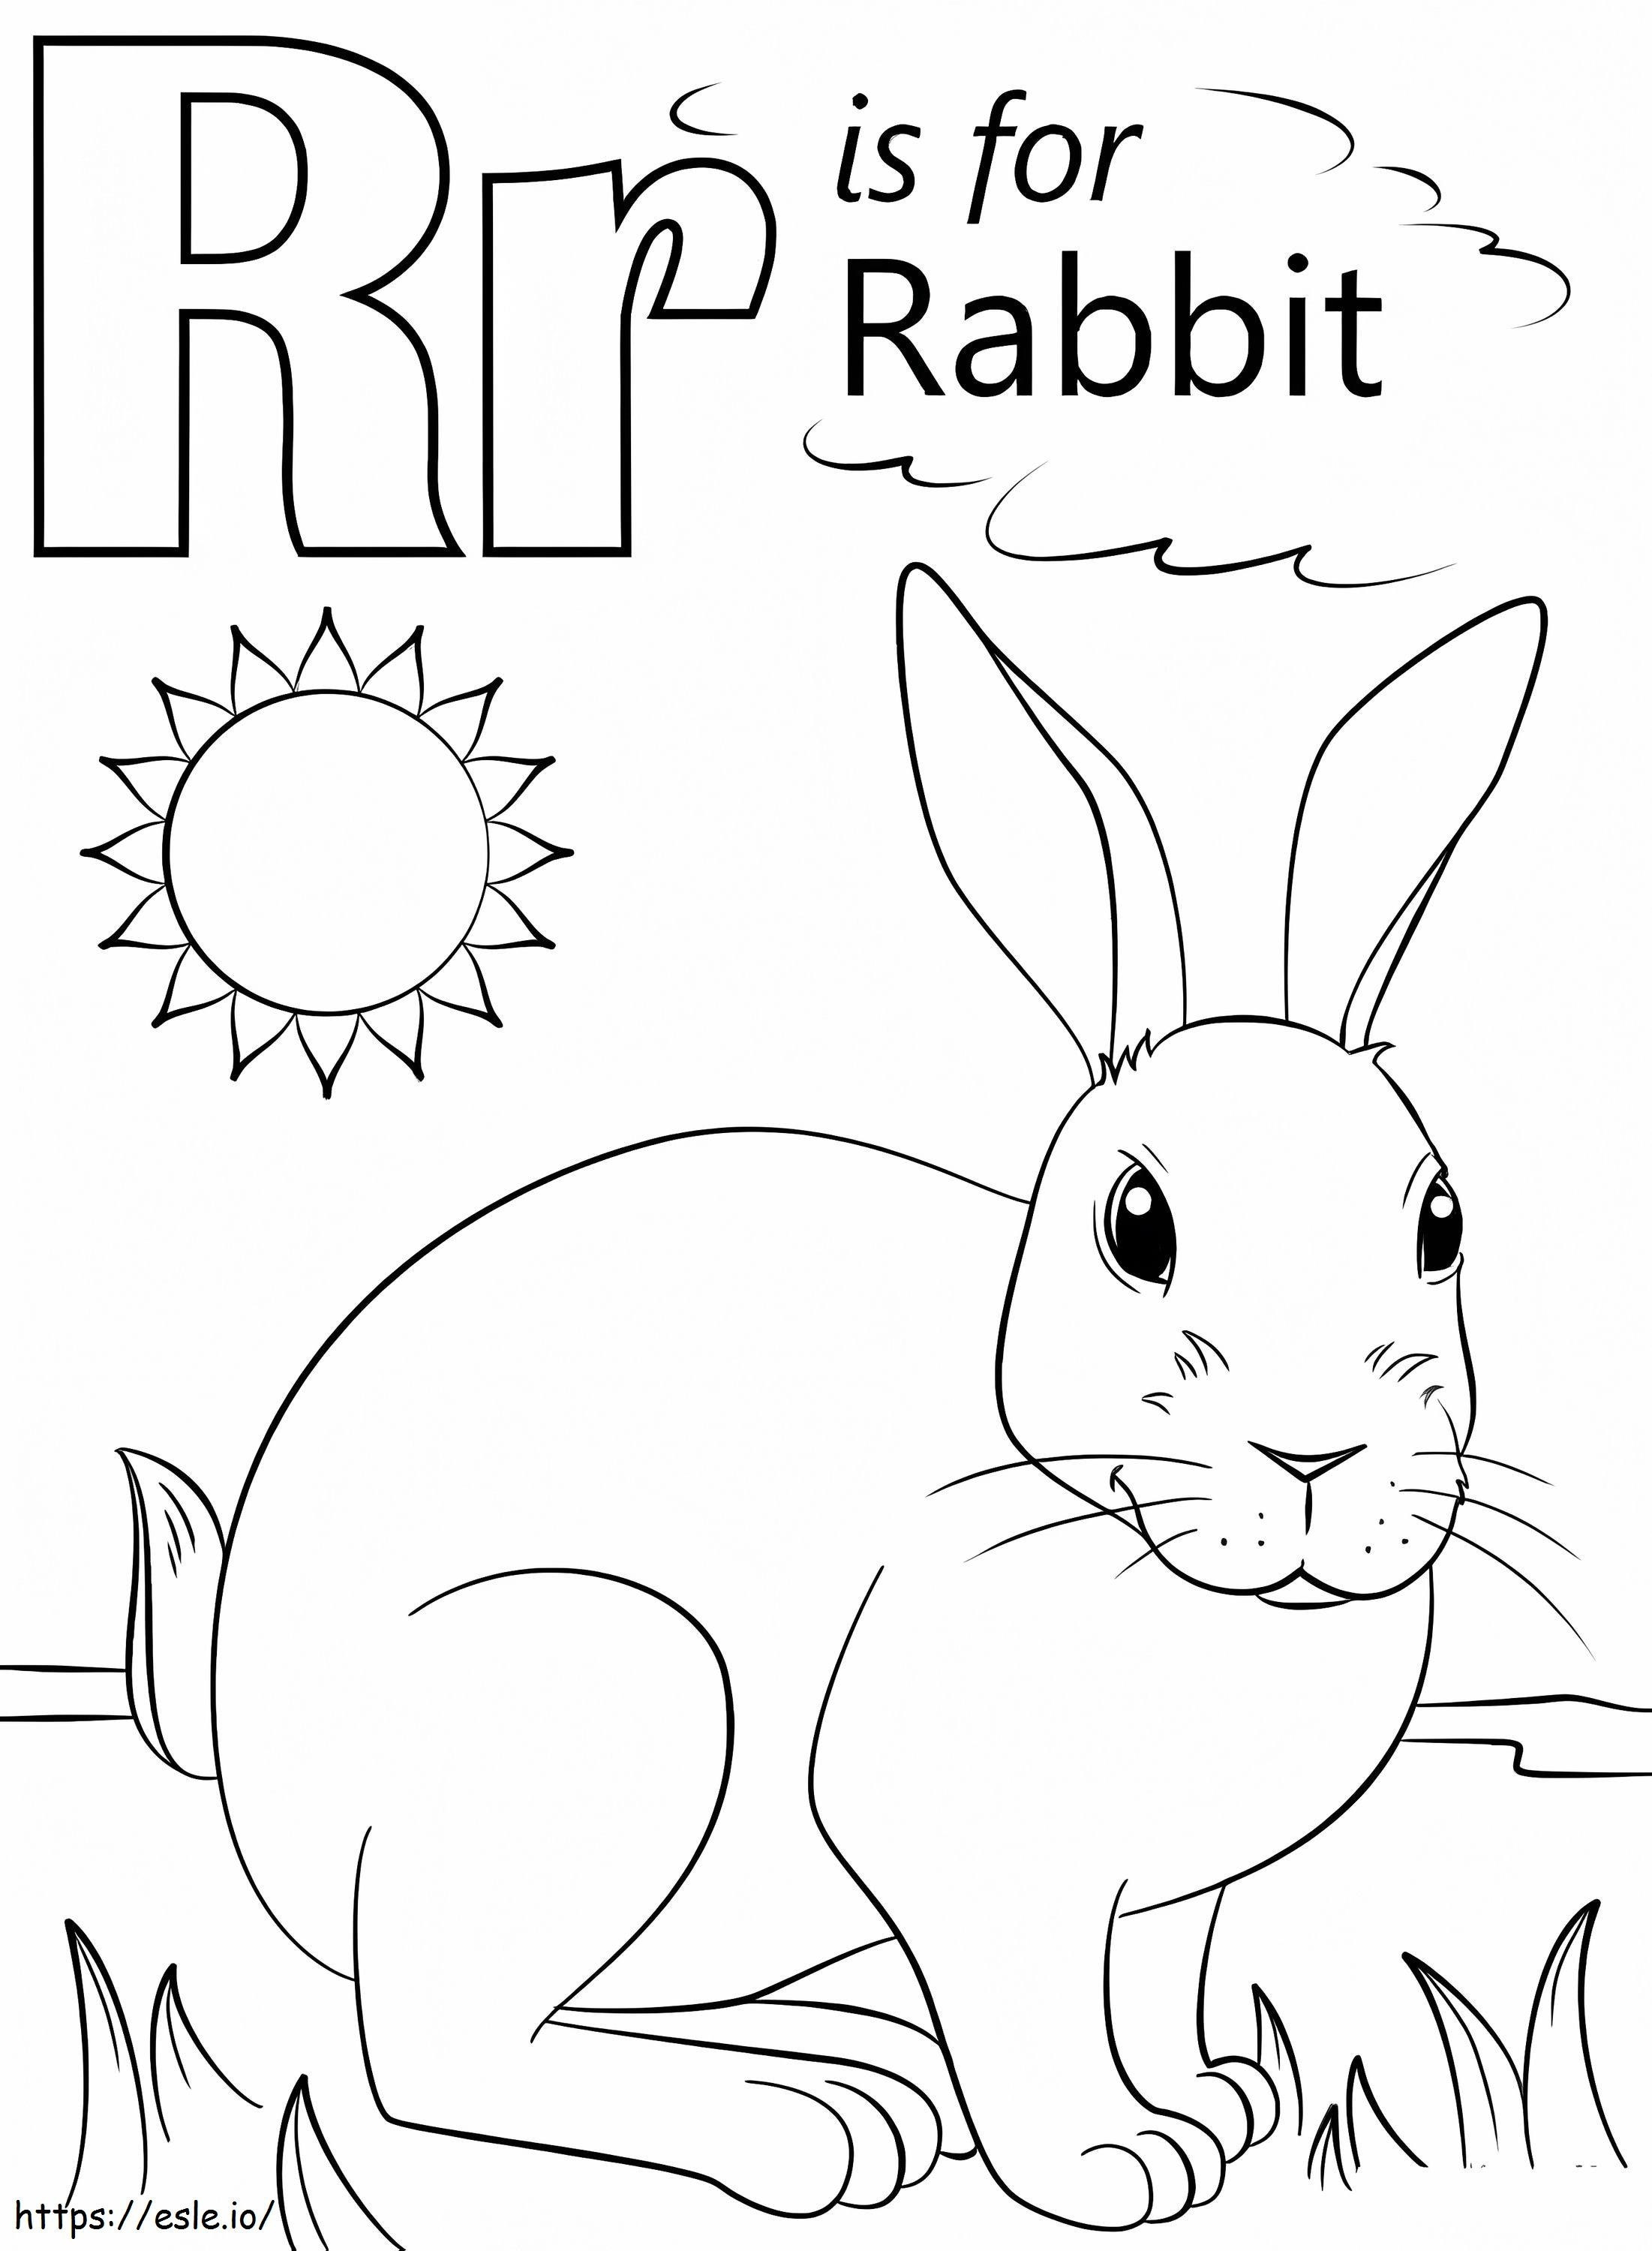 Rabbit Letter R coloring page